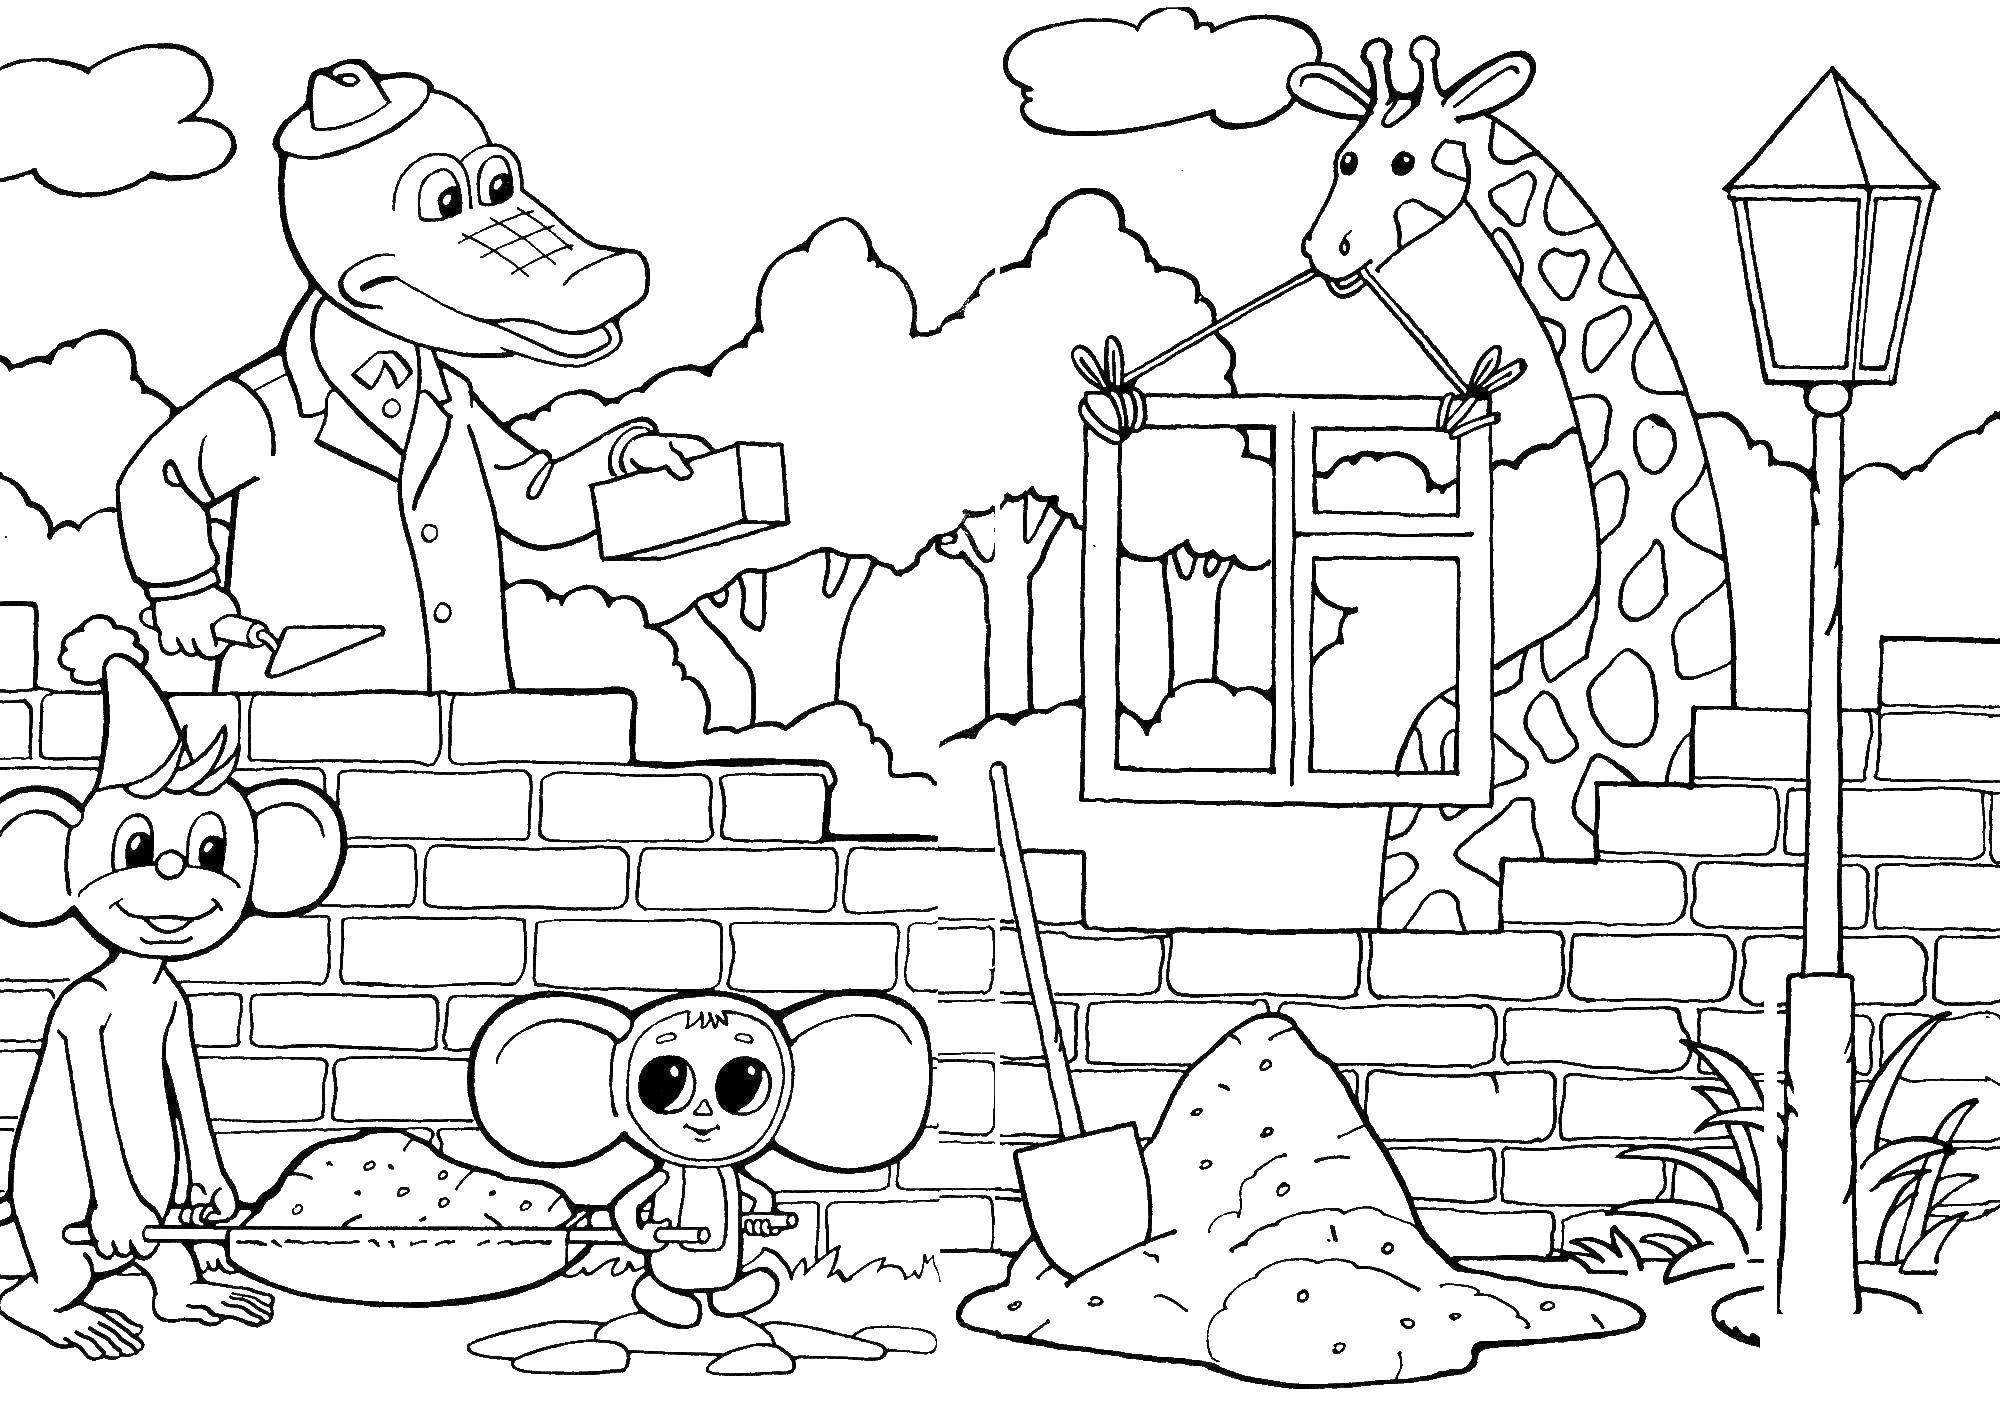 Coloring Crocodile Gena builds with friends. Category cartoons. Tags:  Crocodile.